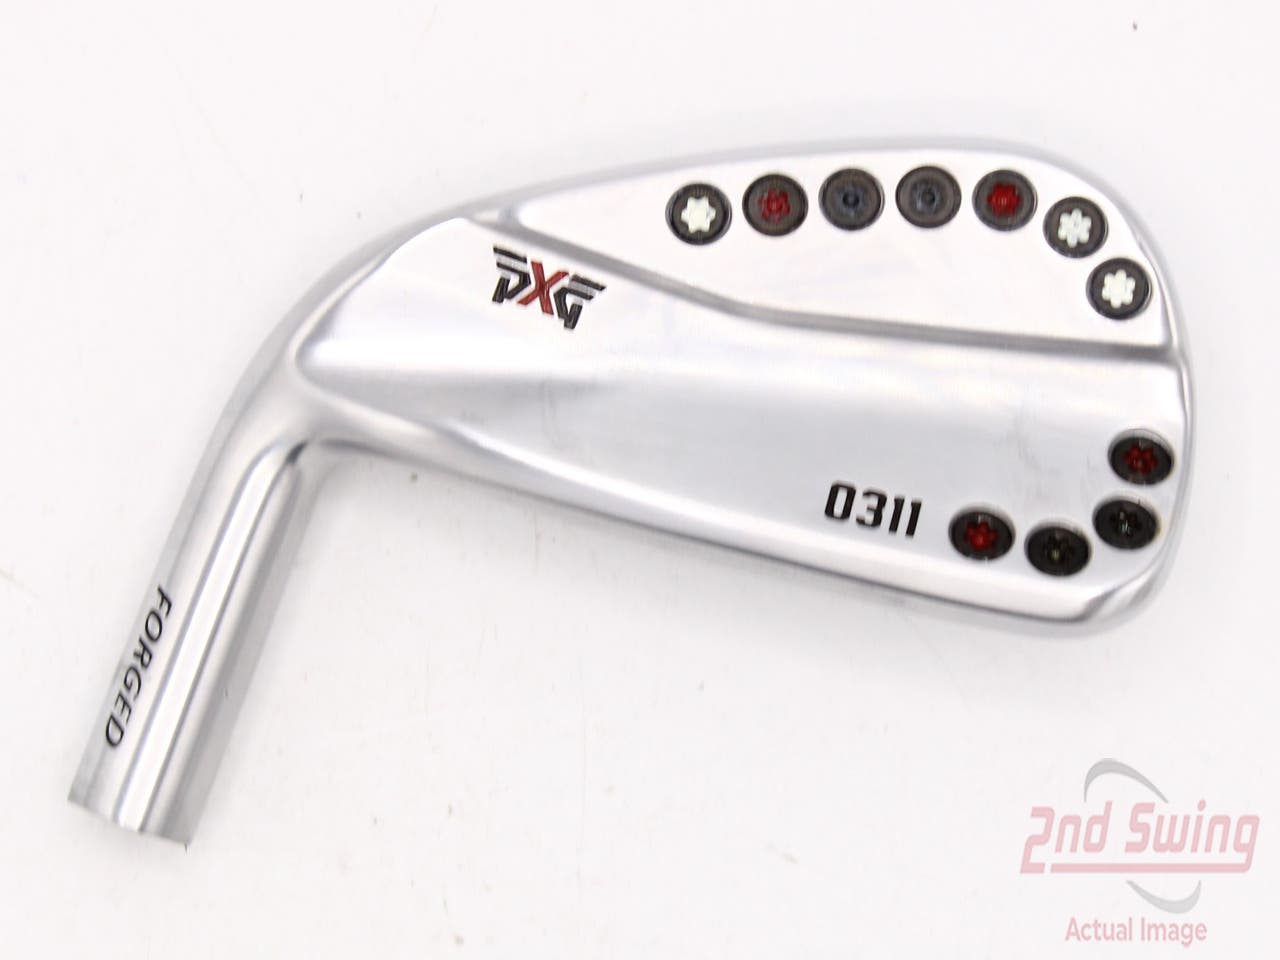 PXG 0311 Chrome Single Iron 7 Iron Left Handed *HEAD ONLY*